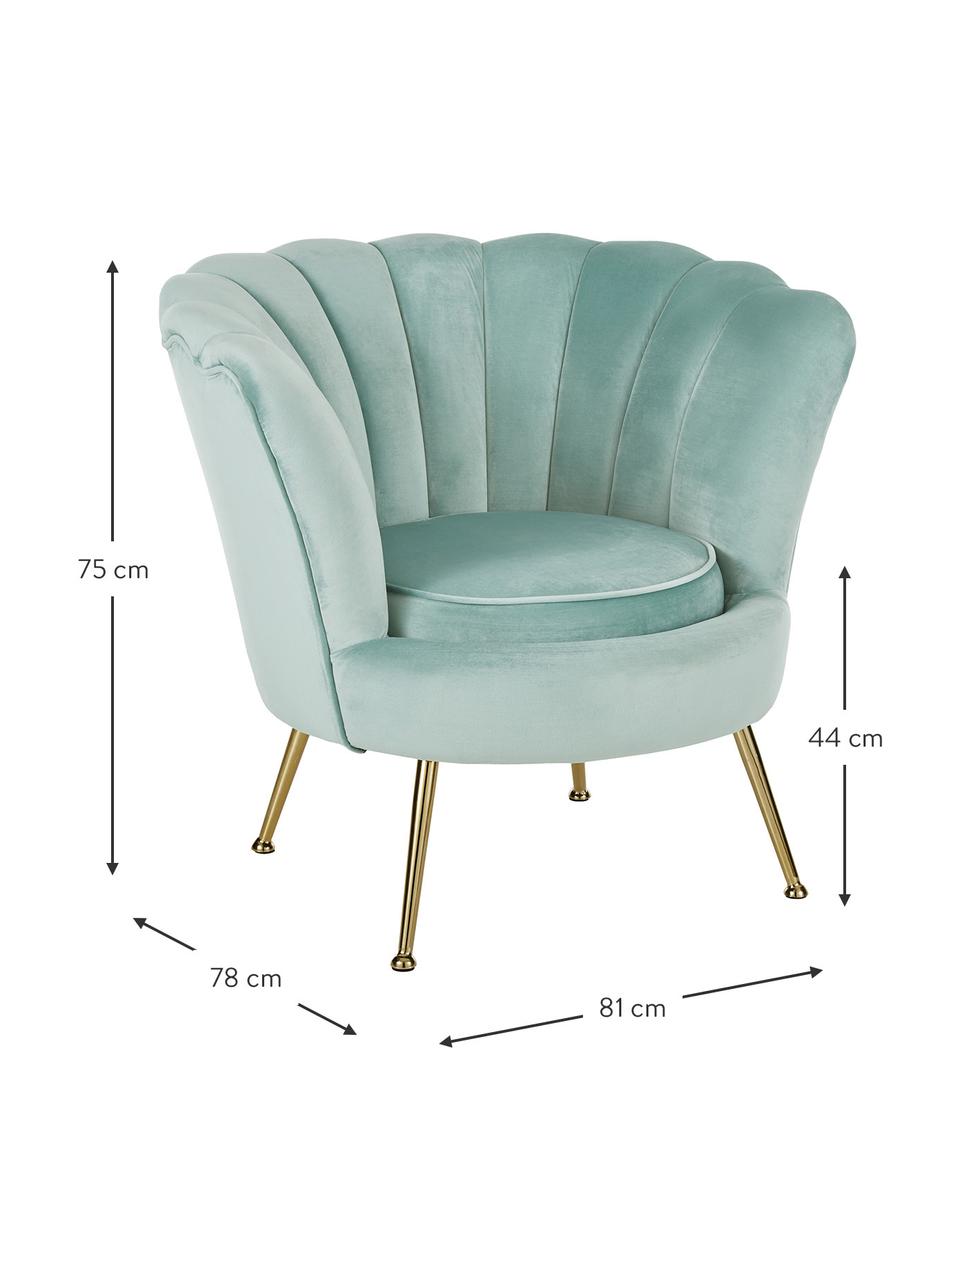 Fauteuil en velours turquoise Oyster, Velours turquoise